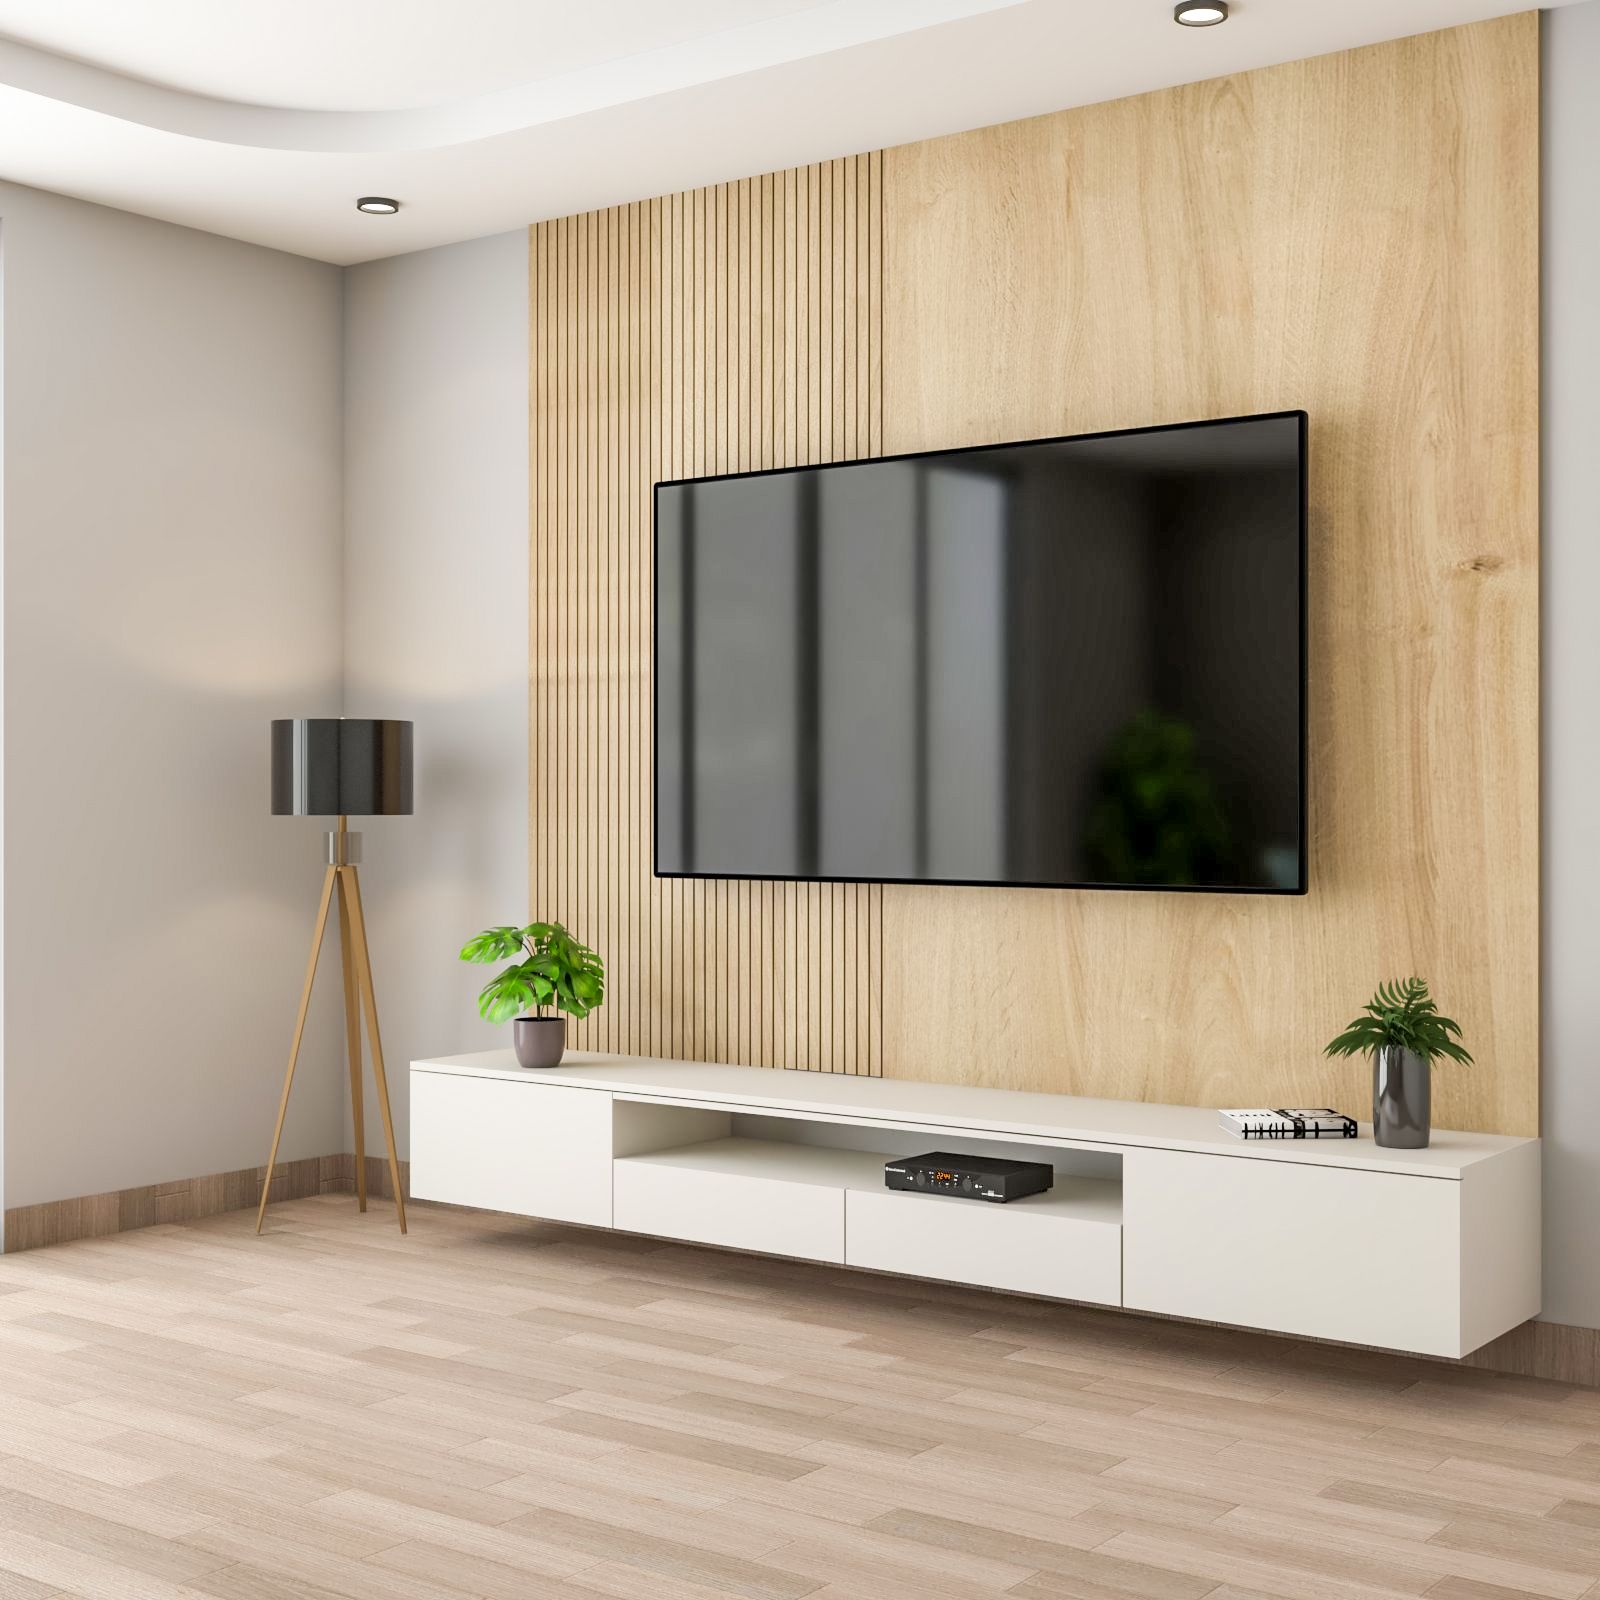 Scandinavian White And Brown Wall-Mounted TV Unit Design With Fluted Panelling